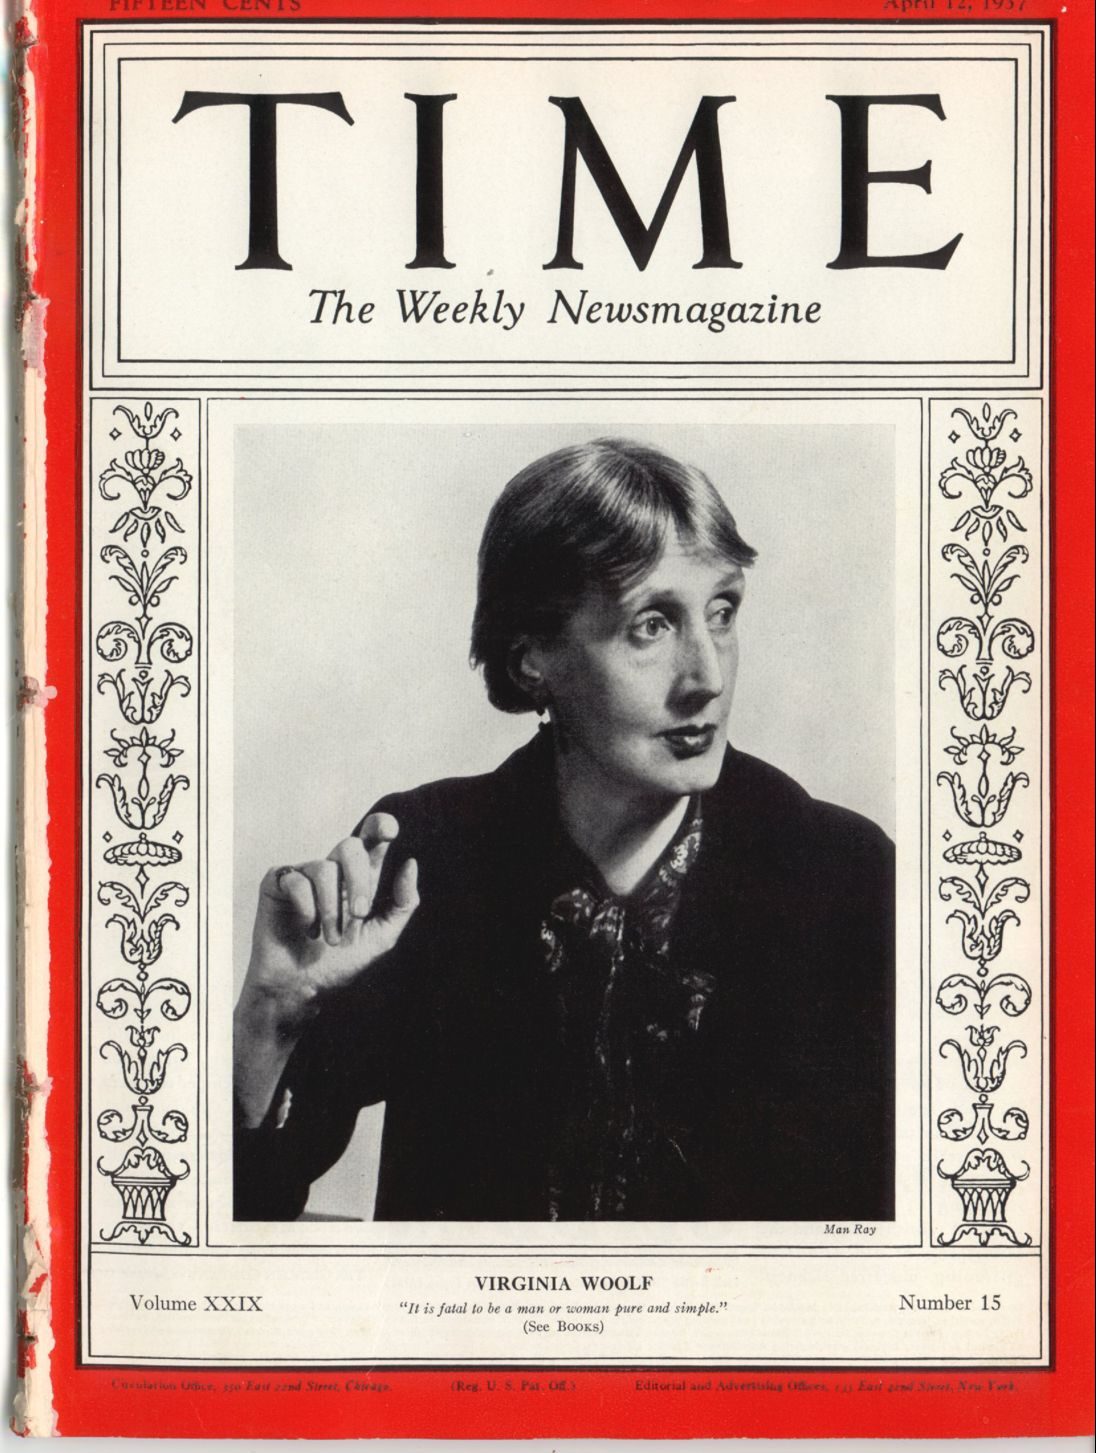 Virginia Woolf on the cover of TIME's April 12, 1937 issue (TIME)